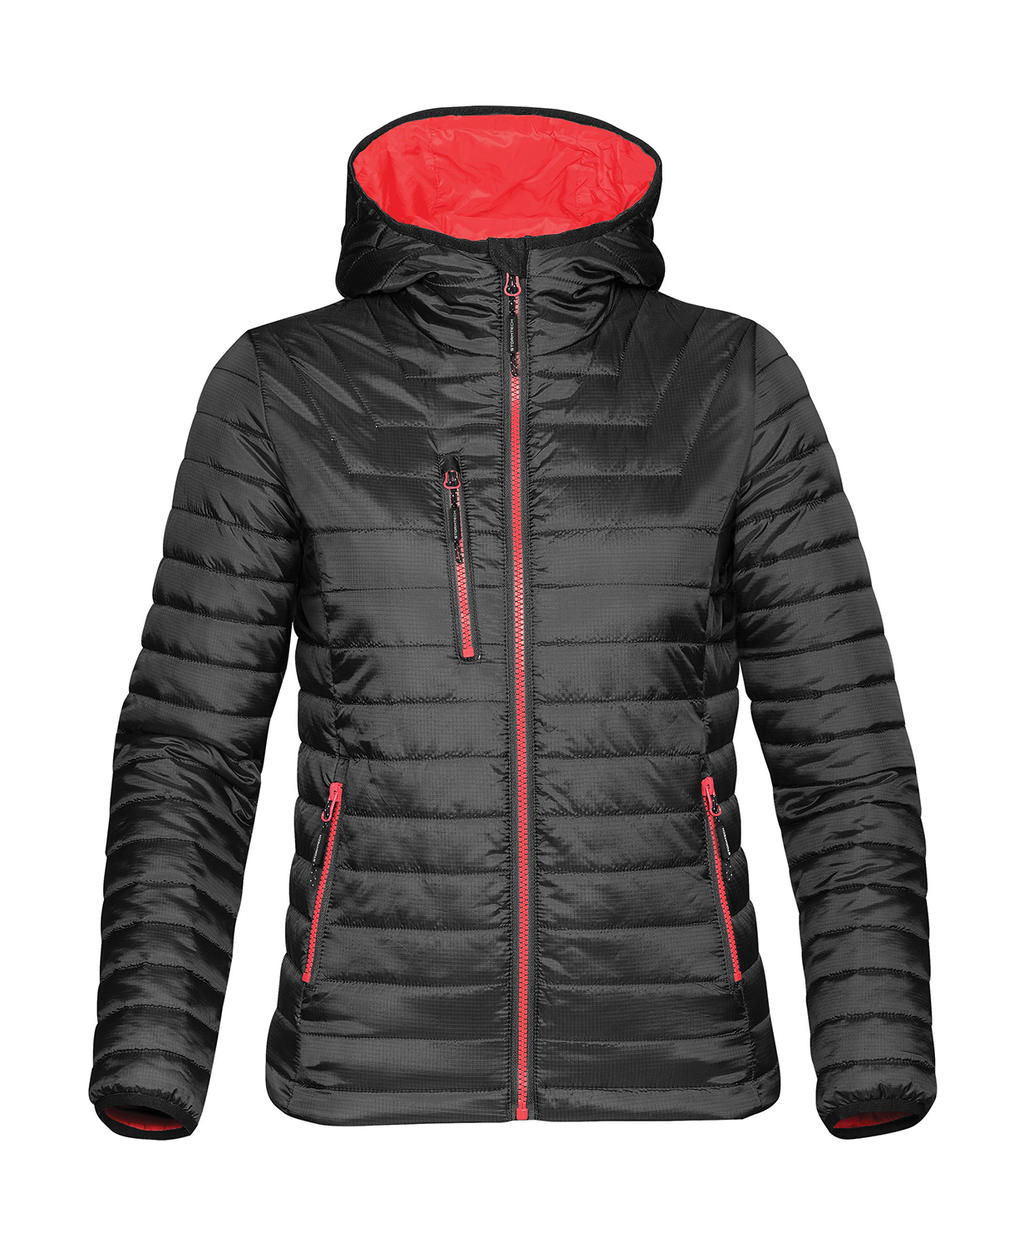  Womens Gravity Thermal Jacket in Farbe Black/True Red